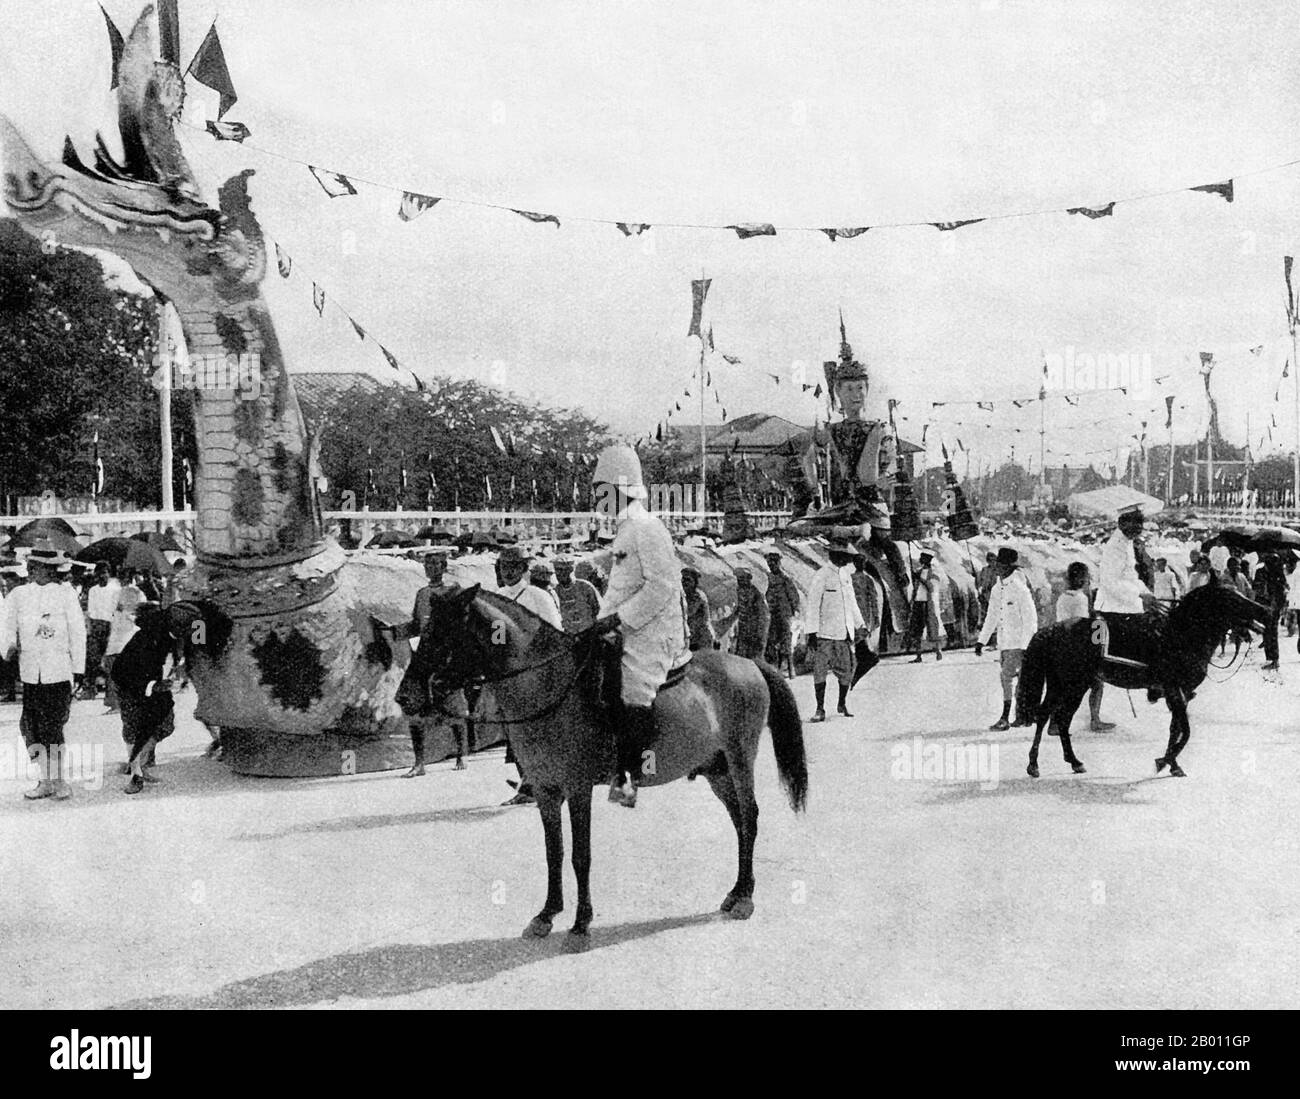 Thailand: A dragon forms part of the procession for King Chulalongkorn’s 40th jubilee celebrations in 1908.  King Chulalongkorn, Rama V (1853–1910) was the fifth monarch of Siam under the House of Chakri. He acceded to the throne in 1868 at the age of 15 after the death of his father, King Mongkut, Rama IV. King Chulalongkorn is considered one of the greatest kings of Siam. His reign was characterized by the modernization of the country, including major governmental and social reforms. He is also credited with saving Siam from being colonized. Stock Photo